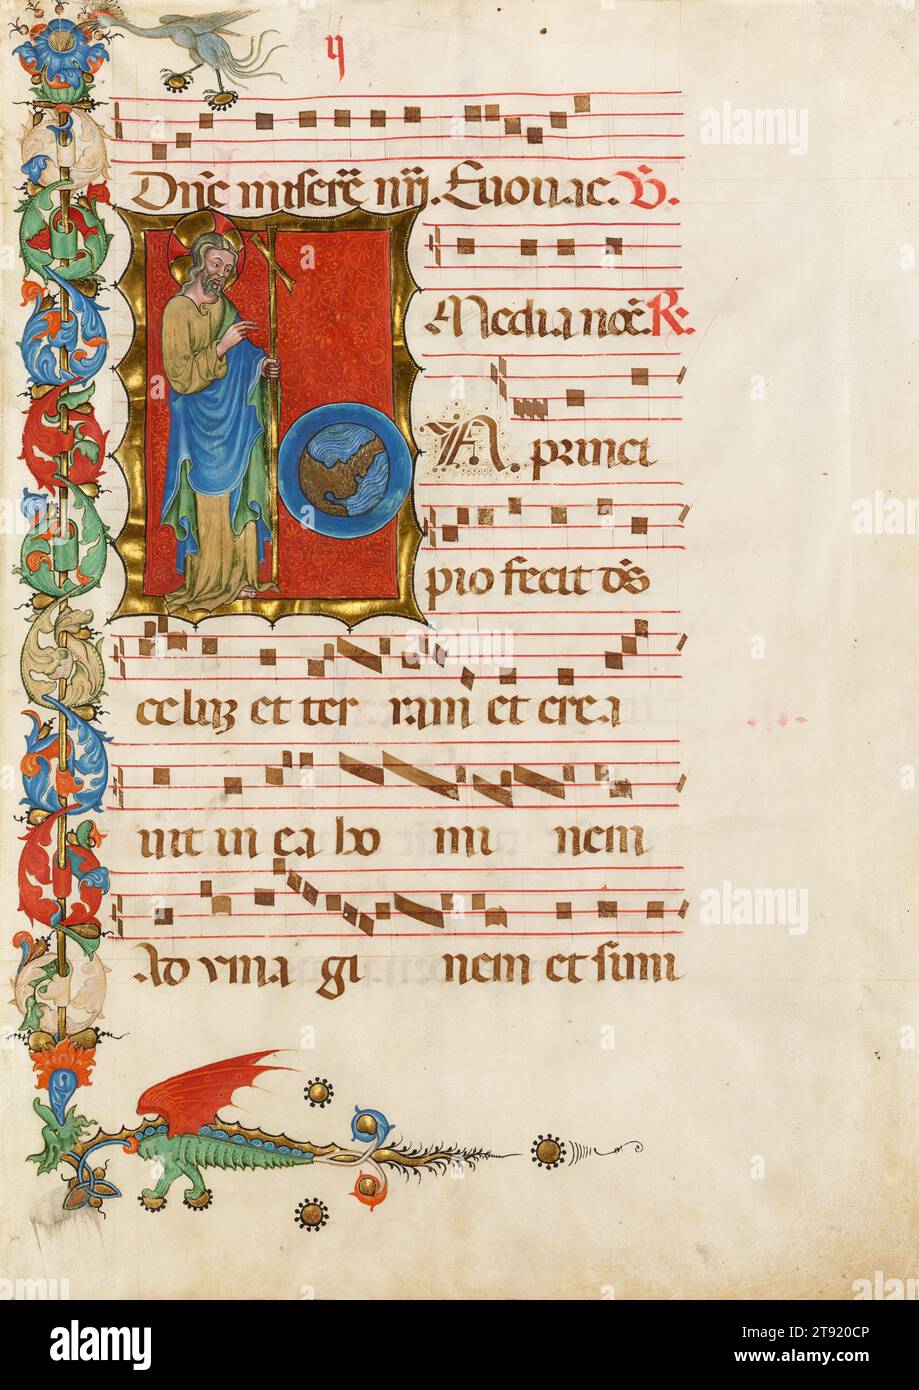 Salvator Mundi (Savior of the World), page from an Illuminated Antiphonary, c. 1425-1450, Unknown Italian (Milan), 15th century, 20 3/4 × 14 7/8 in. (52.71 × 37.78 cm) (sheet)29 5/8 × 23 5/8 in. (75.25 × 60.01 cm) (outer frame), Ink, gouache, and gold on parchment, Italy, 15th century, The decorated letter 'I' shows Christ pointing to a disk-shaped mappa mundi (map of the world), a medieval representation of the then known lands, encircled by the ocean. The image is apt, for this 'I' introduces the phrase In principio fecit deus celum et terram, In the beginning God made heaven and earth Stock Photo